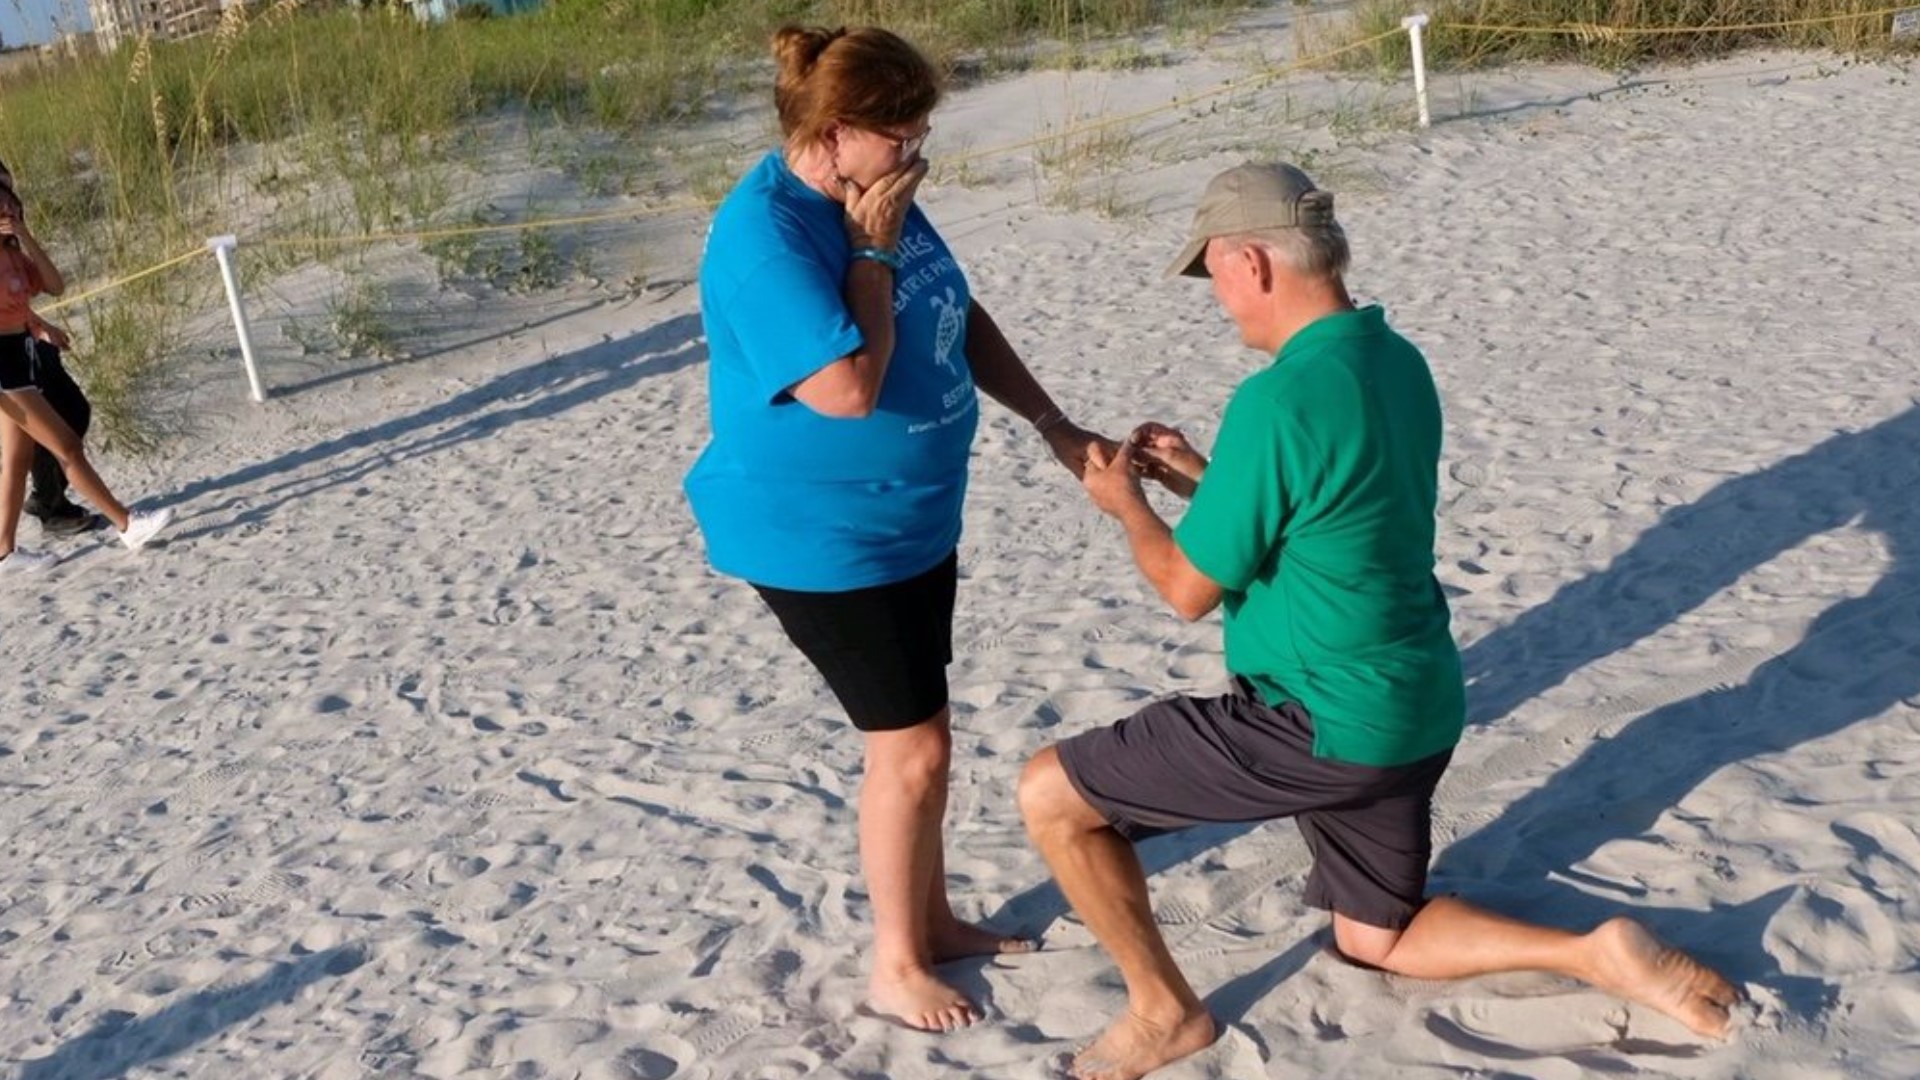 Deb and Dan met at the July 5, 2020 Beaches Clean Up event. He proposed to her at the July 5, 2022 event. She said yes!